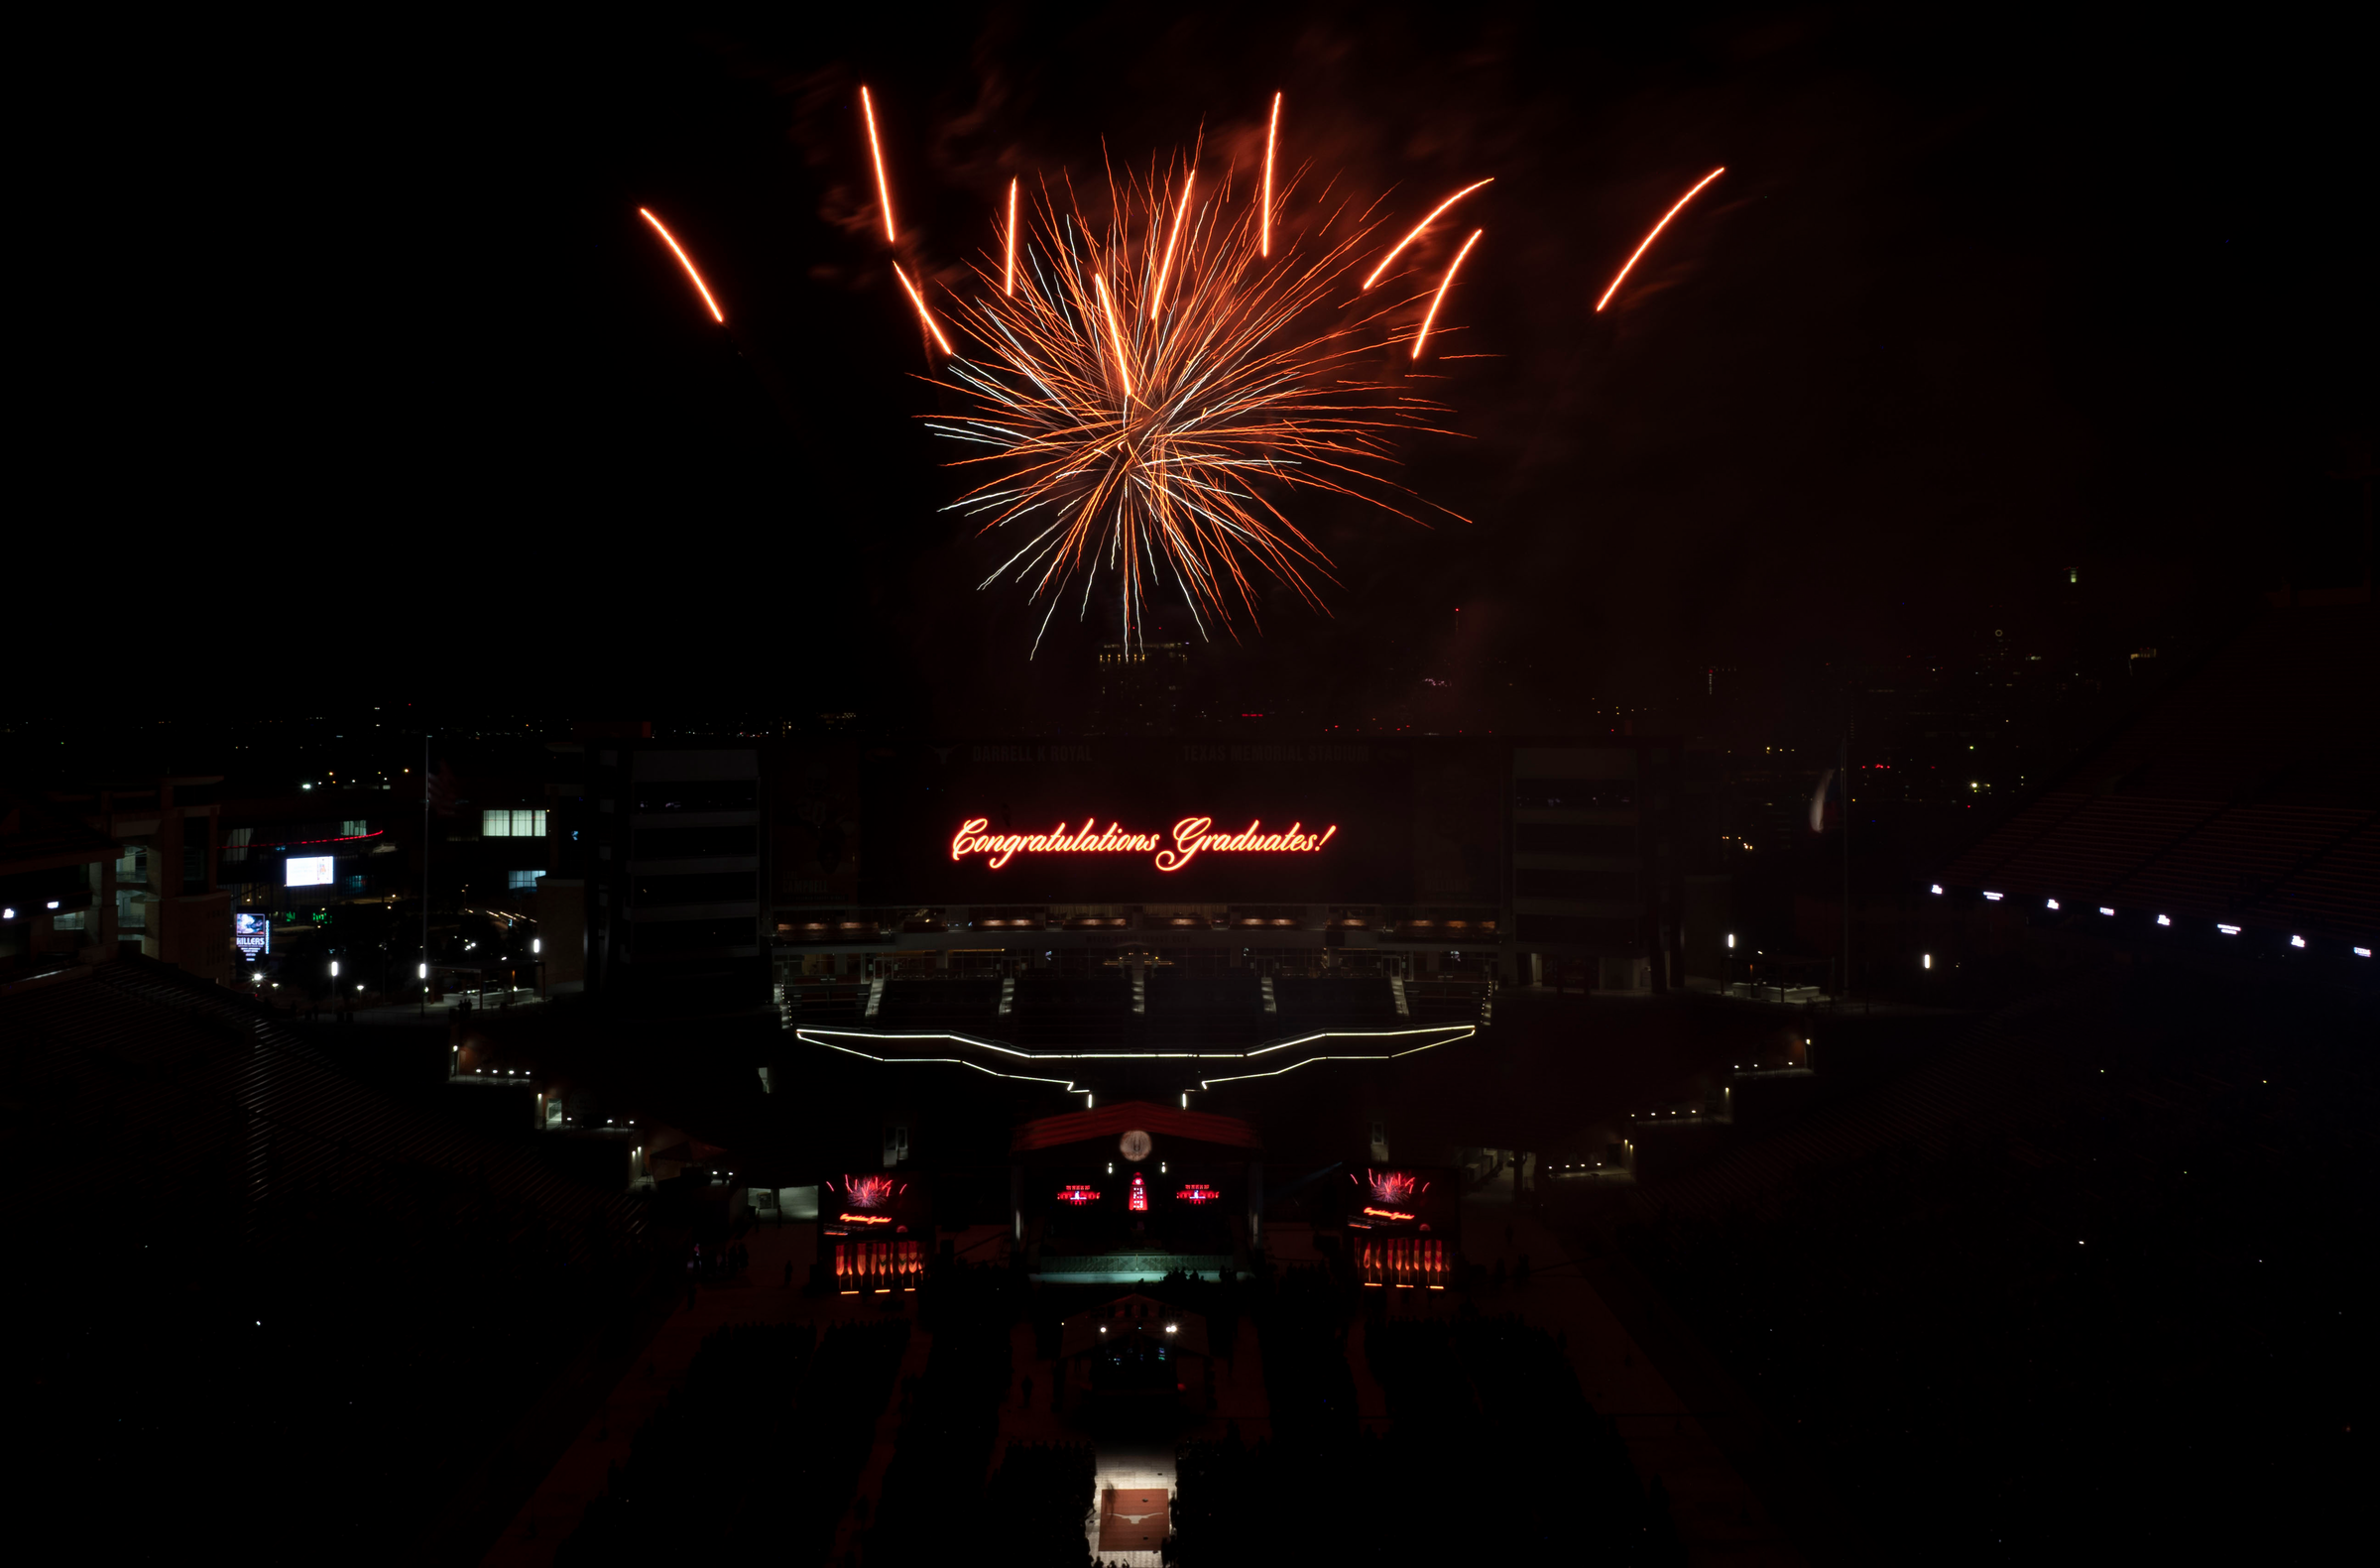 Fireworks appear over the words "Congratulations, graduates!" and a Longhorn silhouette.